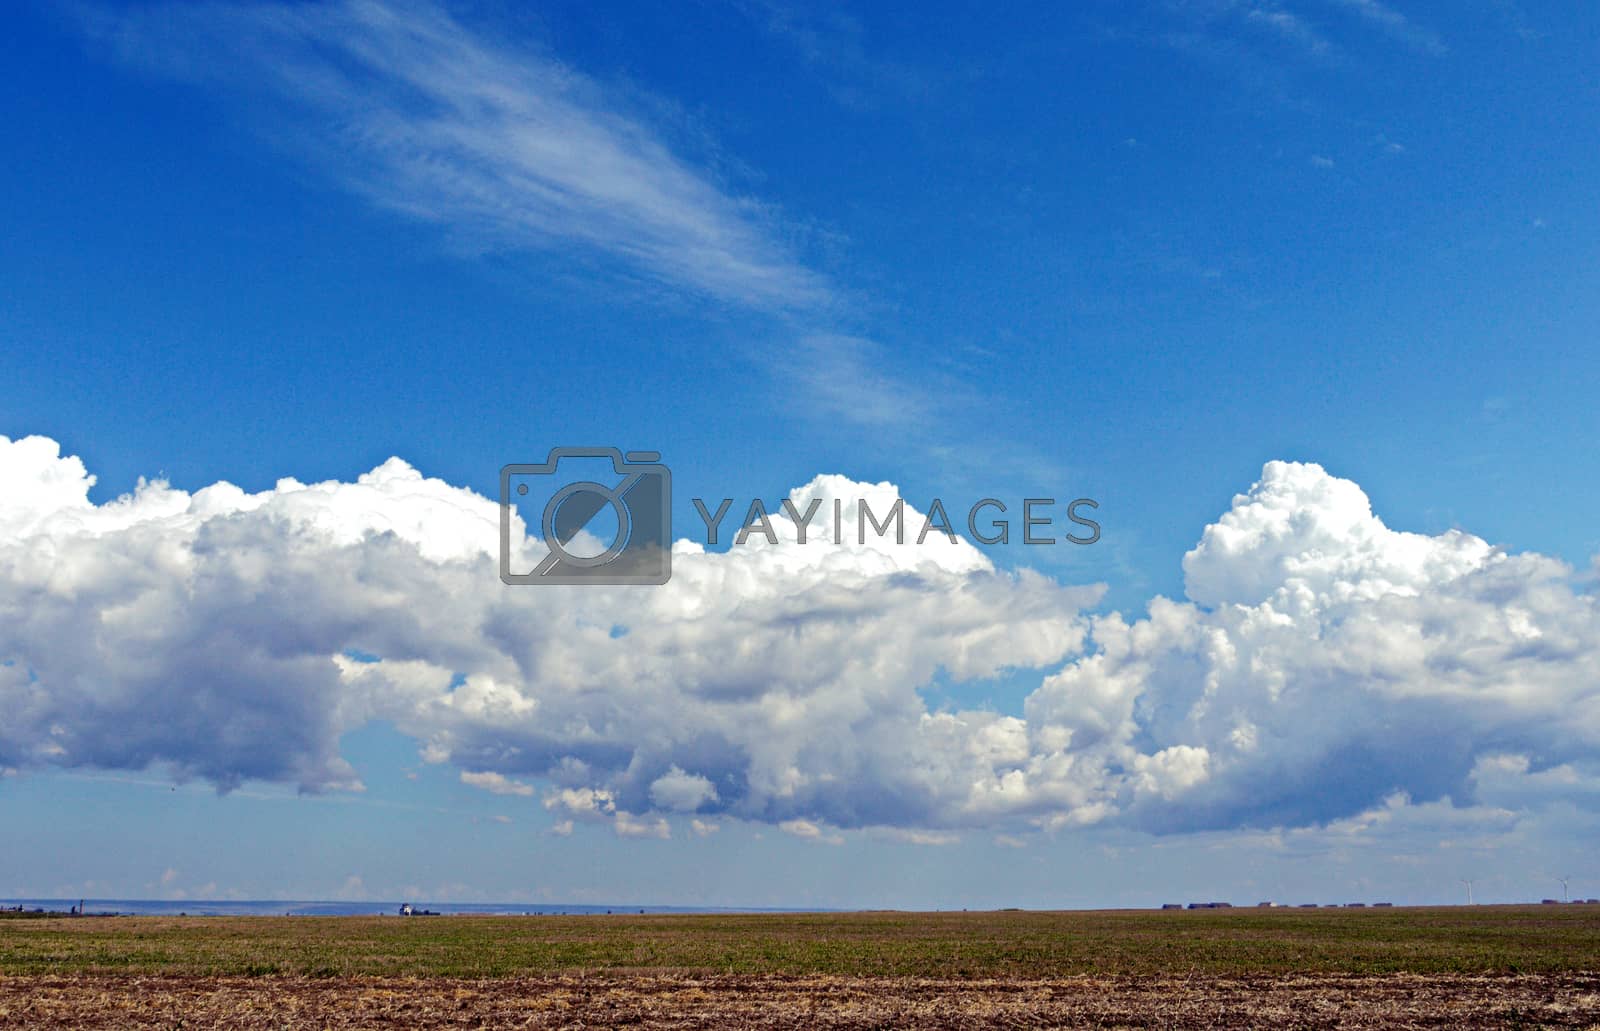 Royalty free image of Magnificent landscape of the spring field stretching into the distance with low hanging dense white clouds. Beautiful picture of a spring day. by Adamchuk